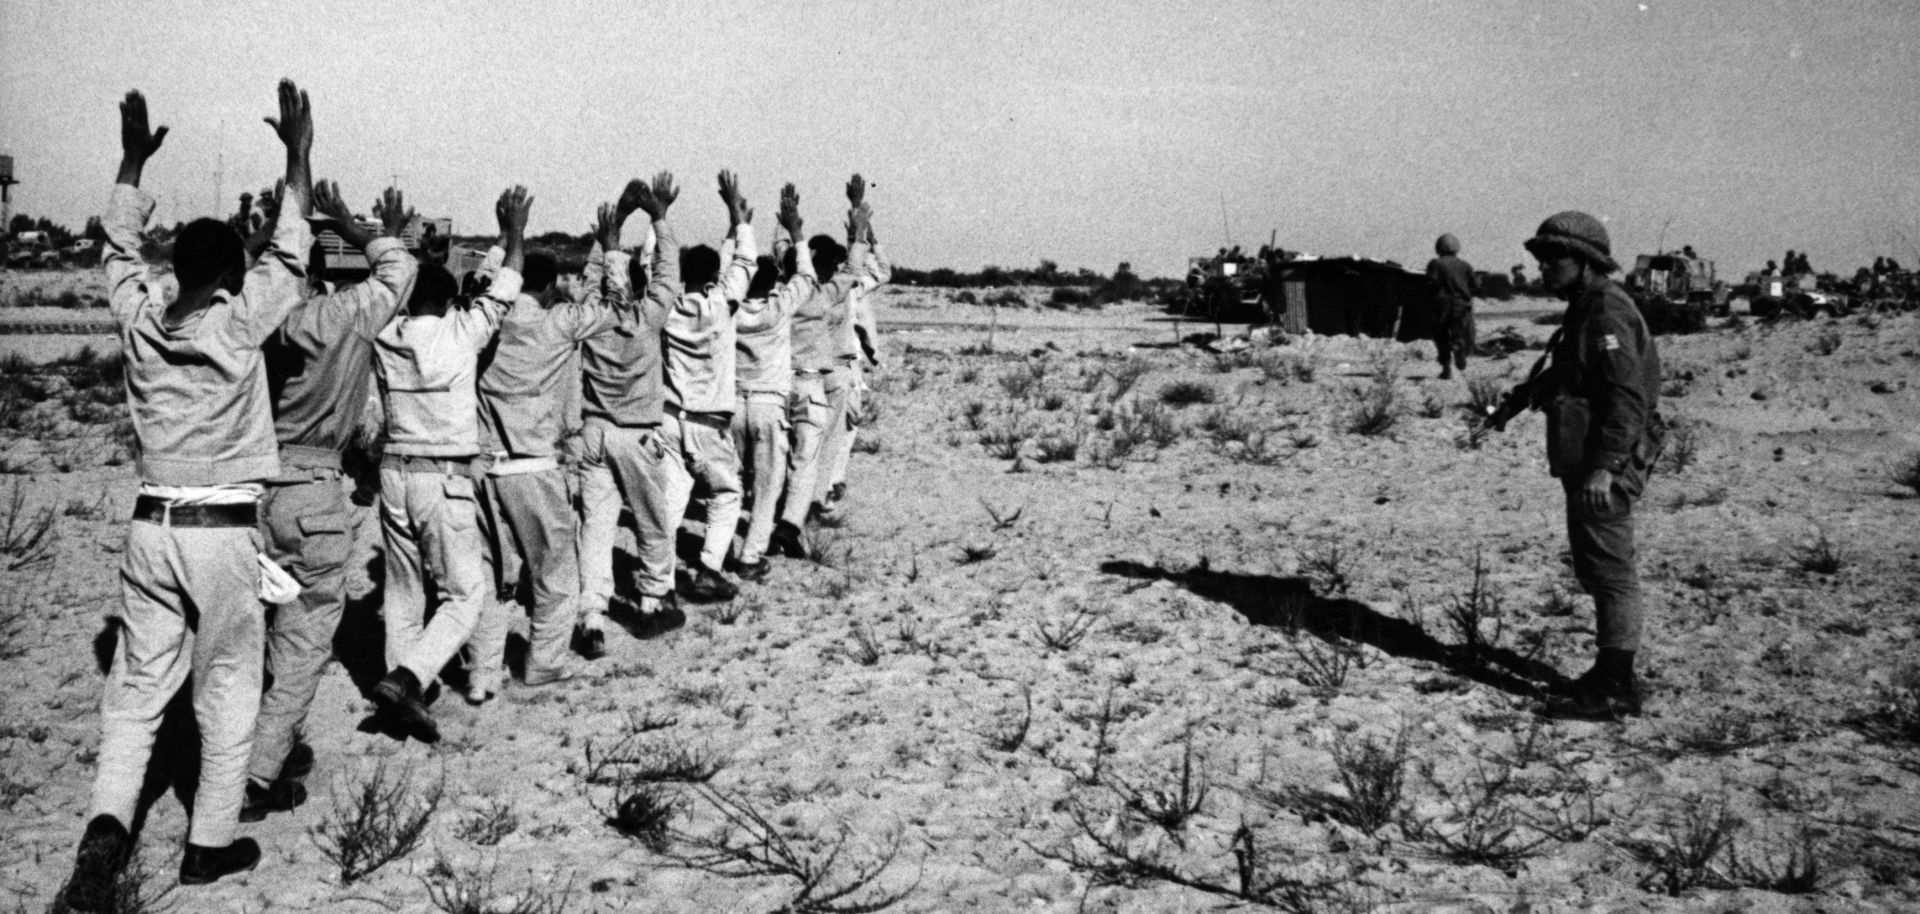 Egyptian prisoners of war holding their hands aloft after being rounded up by Israeli forces in the Sinai Desert following the Six-Day War in 1967.